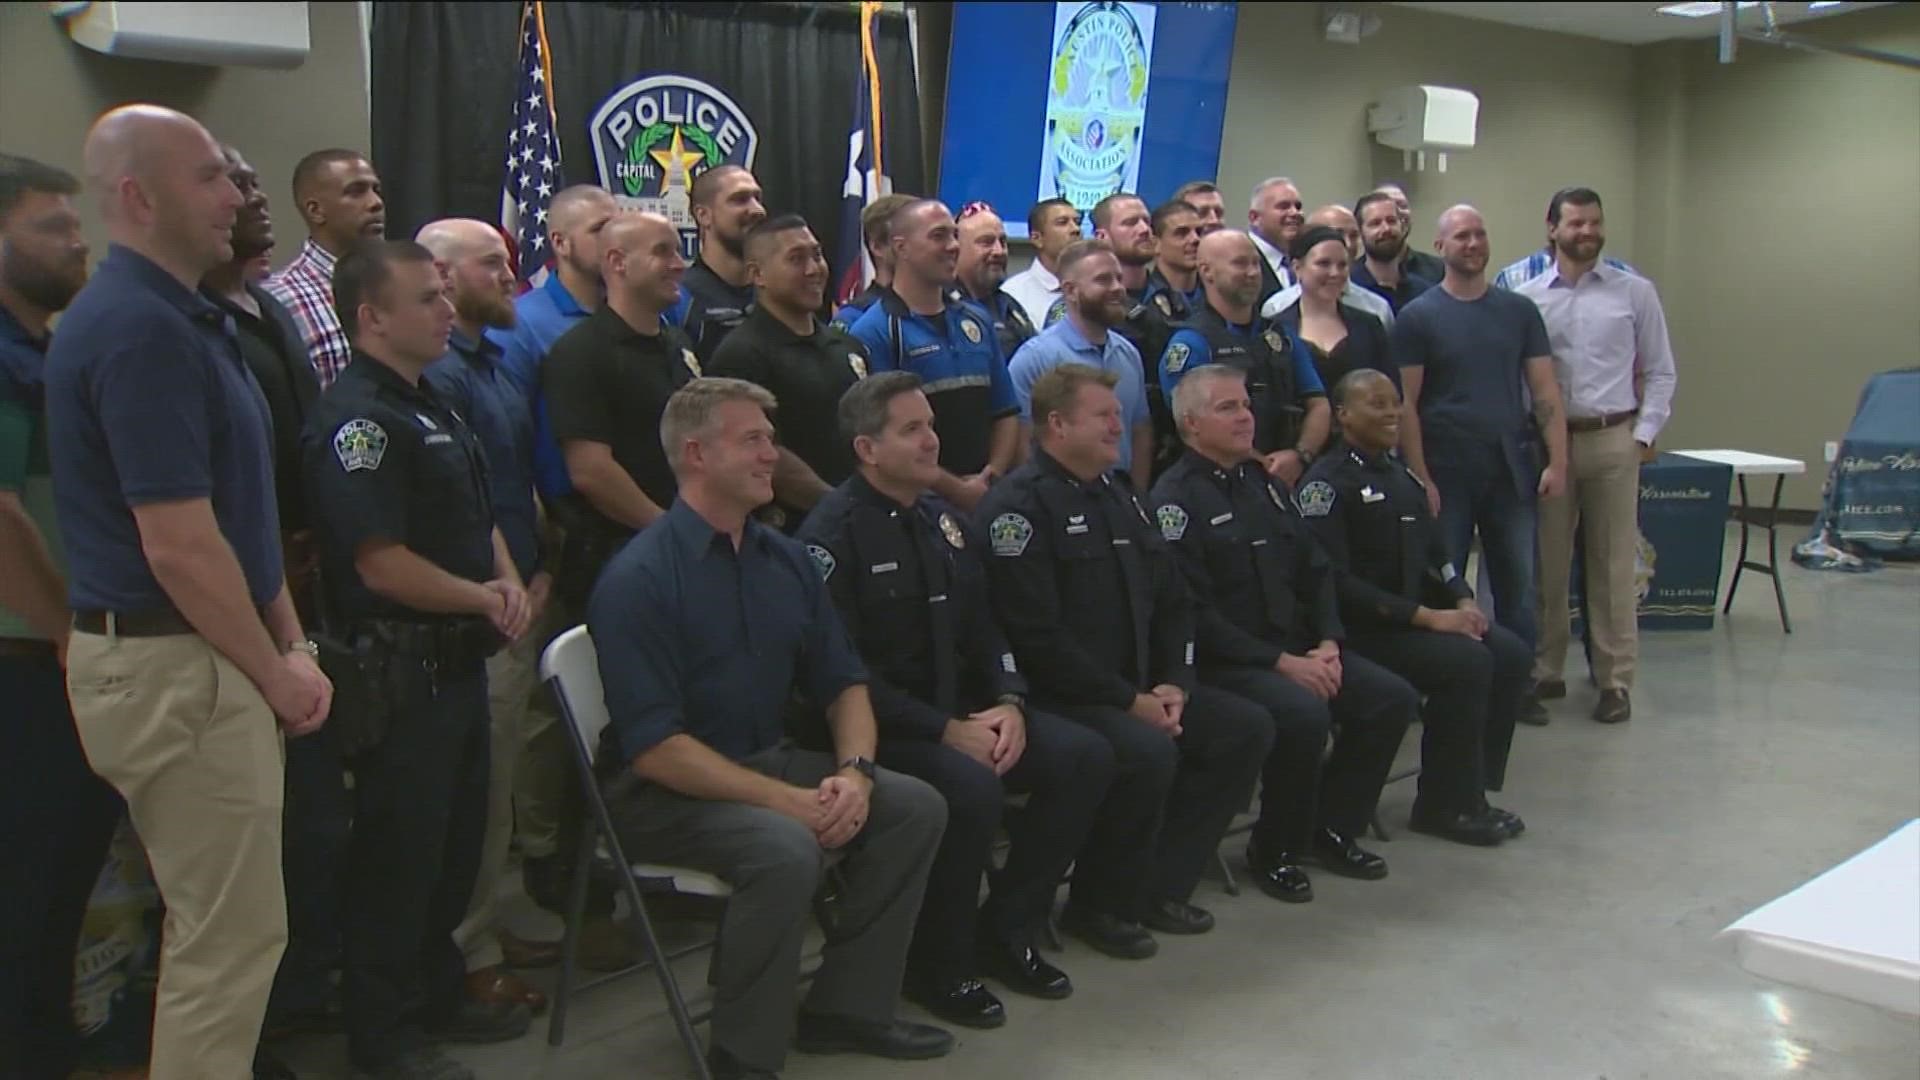 An awards dinner was held for the 63 officers who responded to the shooting where one man died and more than a dozen others were injured.